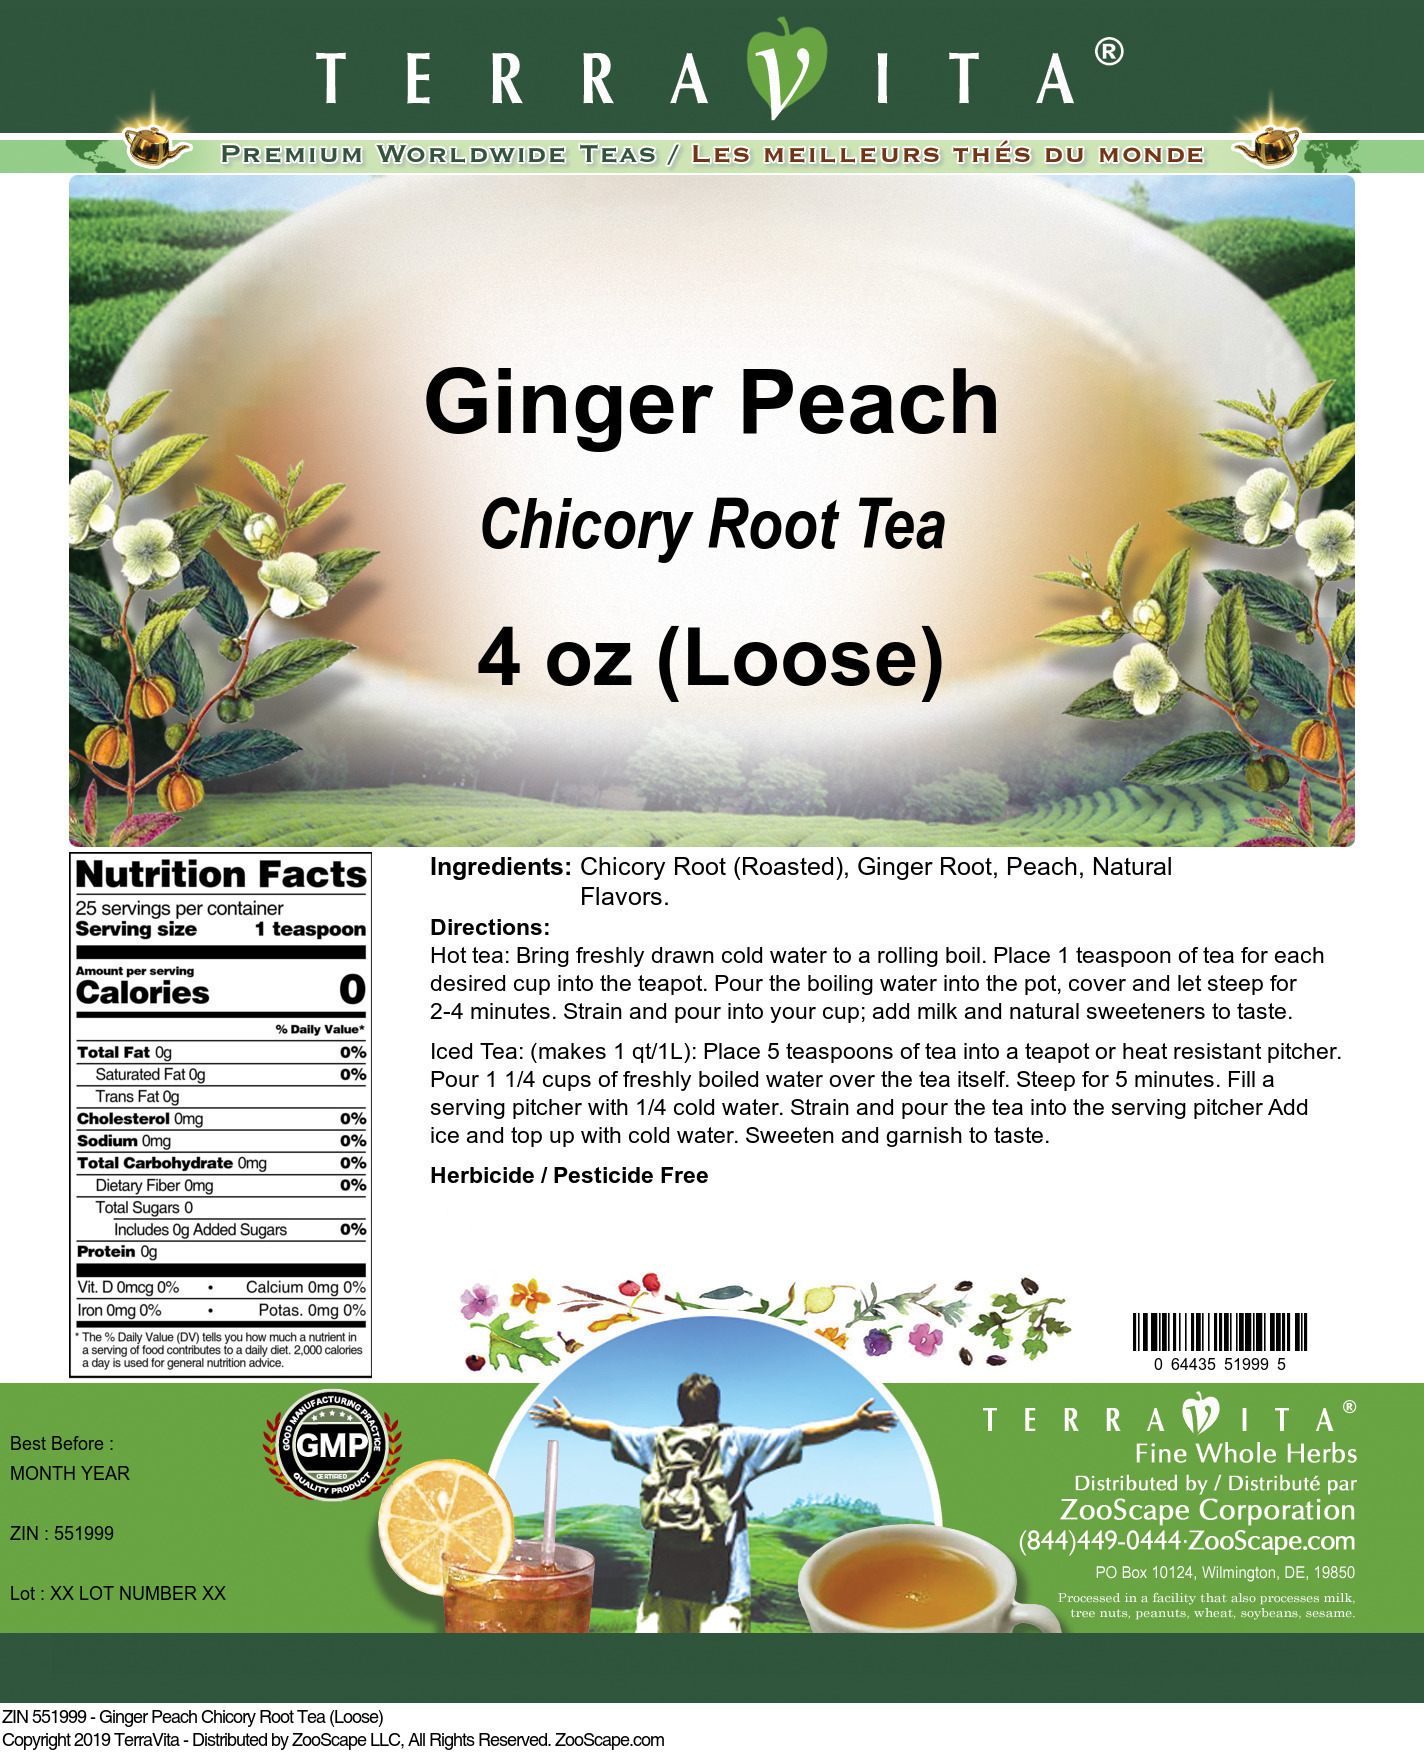 Ginger Peach Chicory Root Tea (Loose) - Label